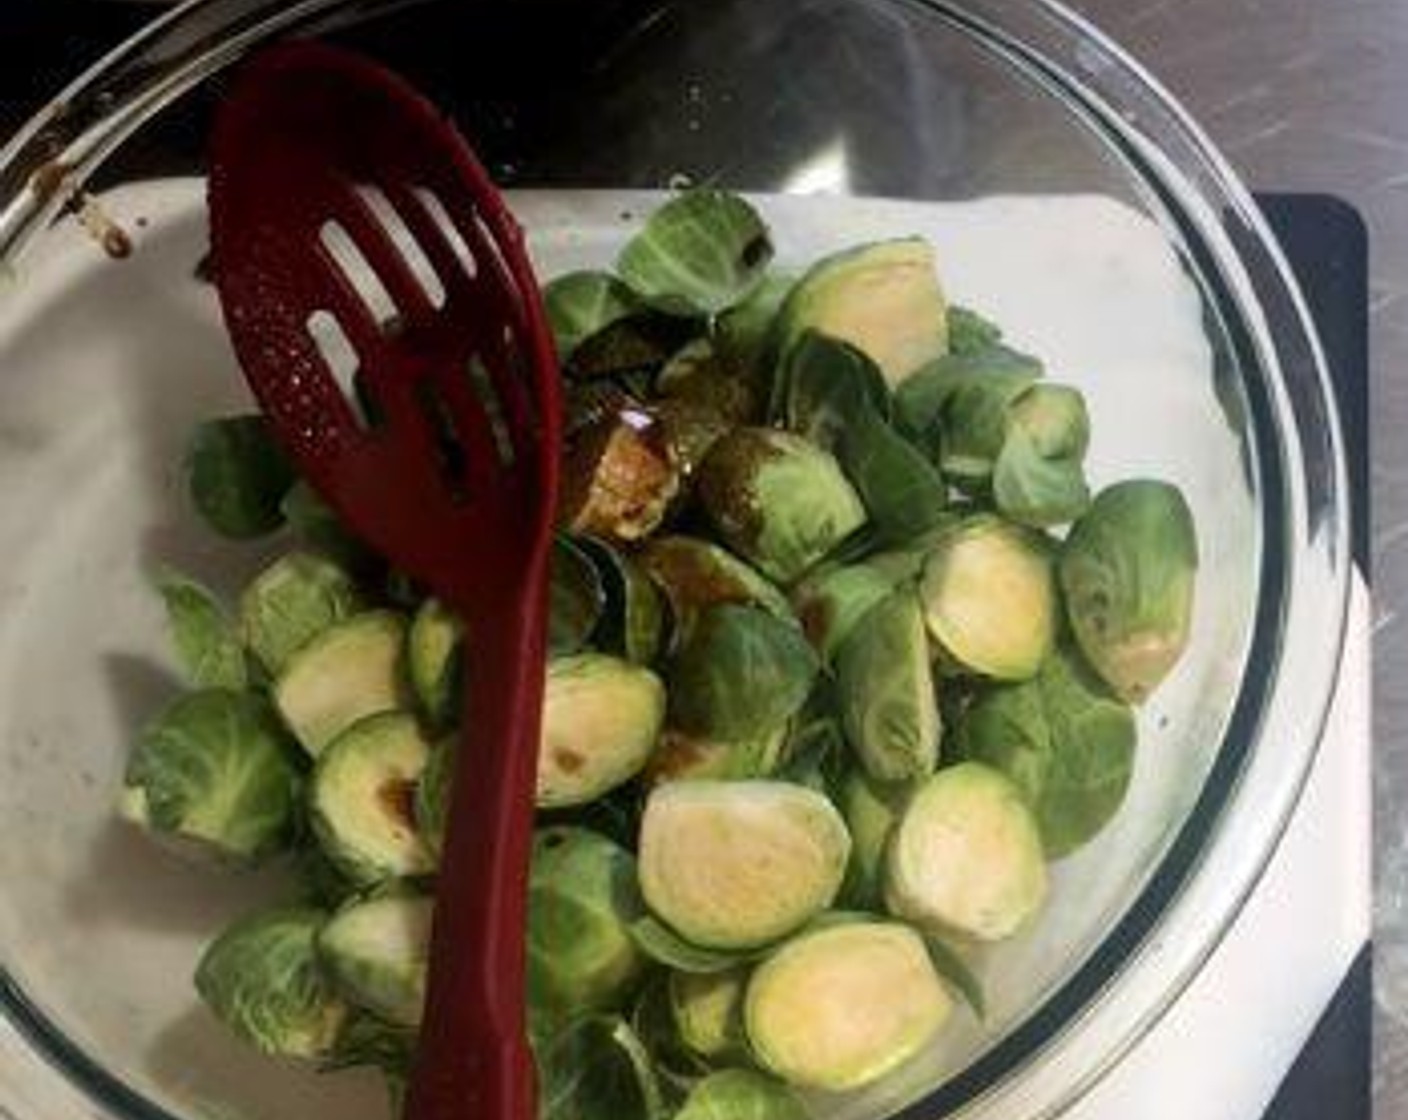 step 1 In a mixing bowl, mix together the Granulated Sugar (1/2 cup), Balsamic Vinegar (1/3 cup), Low-Sodium Soy Sauce (1/4 cup), and McCormick® Garlic Powder (1 Tbsp). Pour this mixture over the Brussels Sprouts (10 cups) together with the Onion (1).